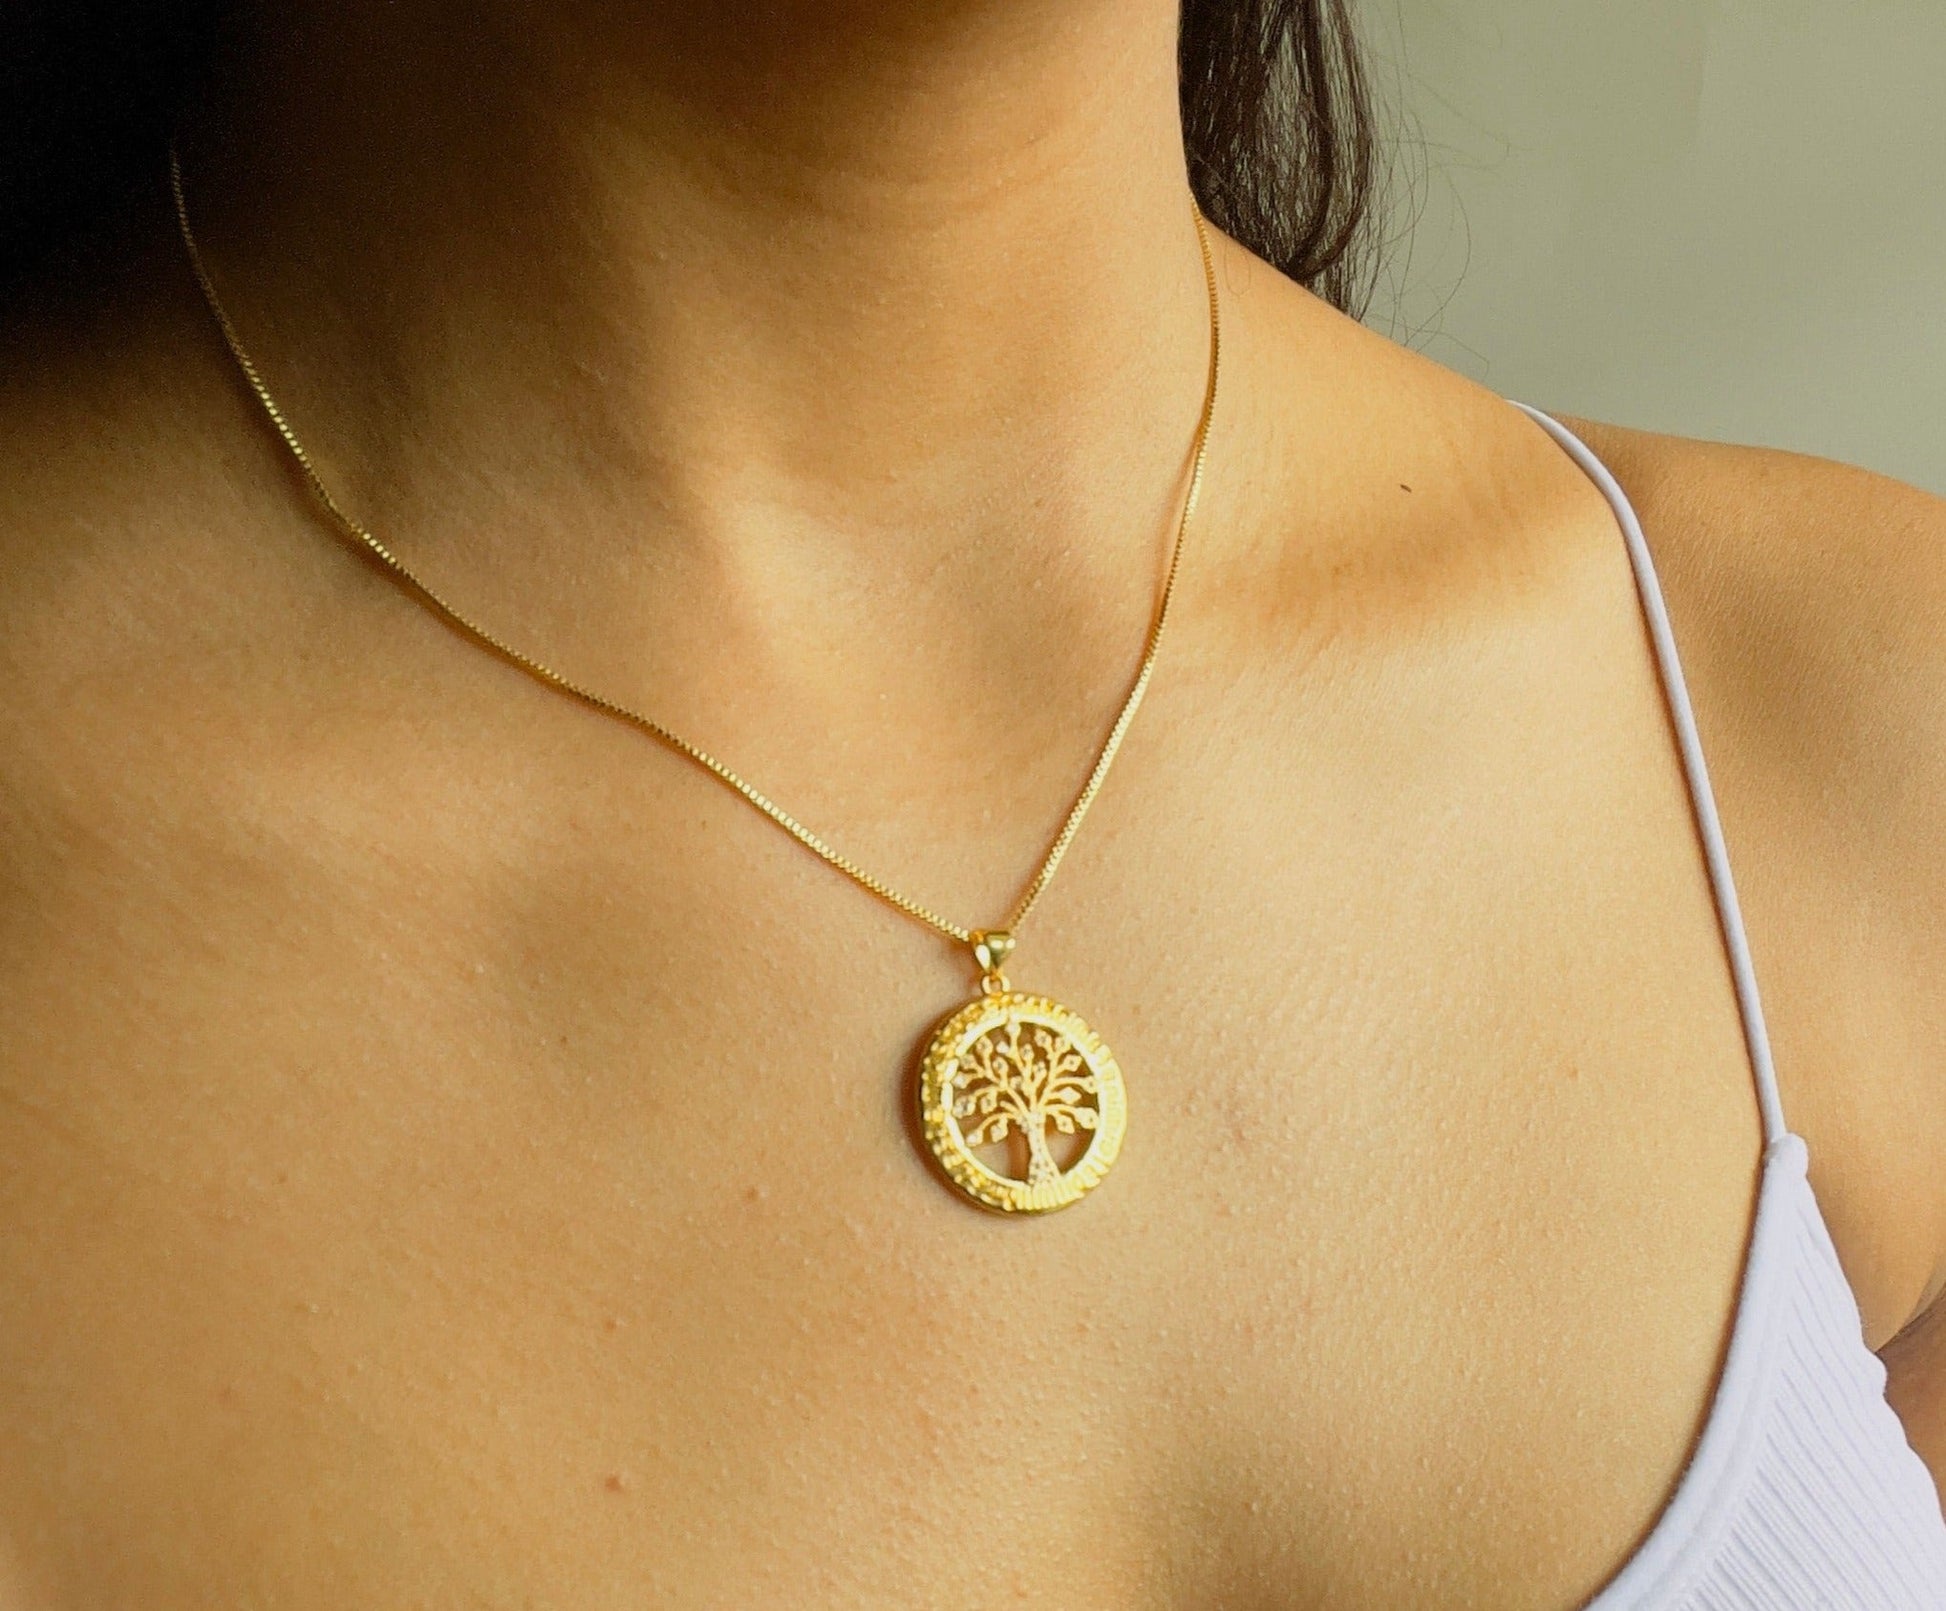 family tree pendant necklace in gold in a woman's neck